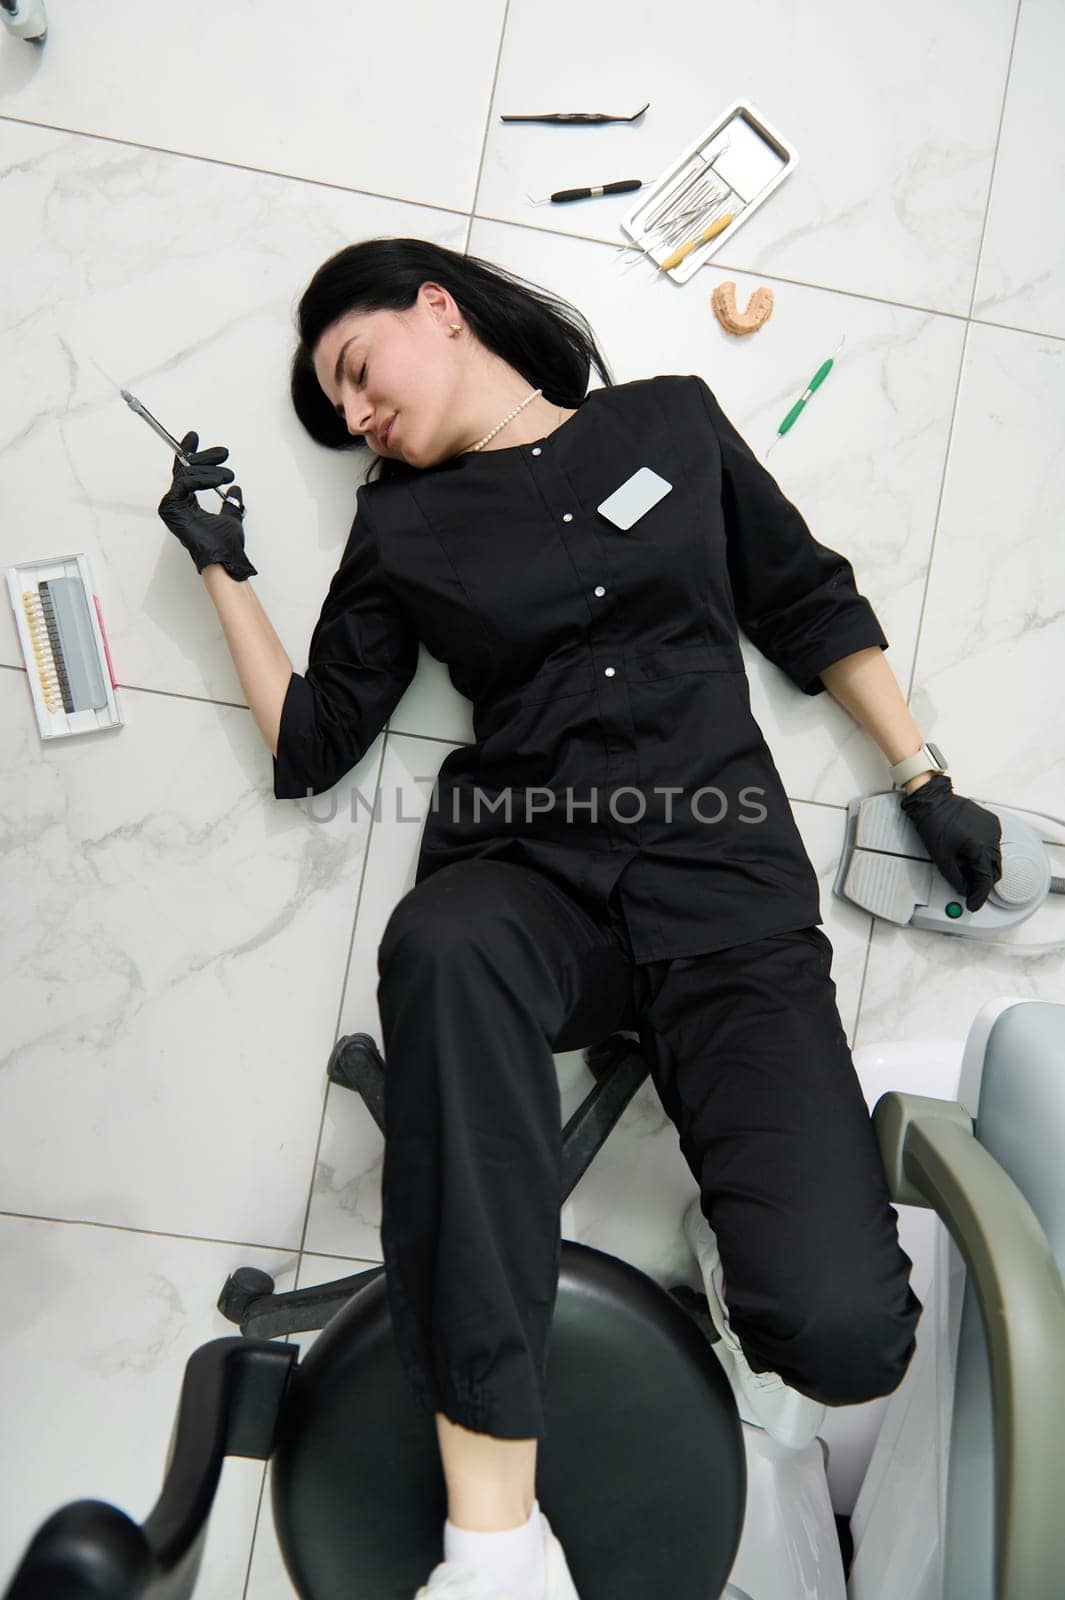 Hardworking female dentist holding syringe, sleeping on the floor, feeling tired after hard day at work in dental office by artgf